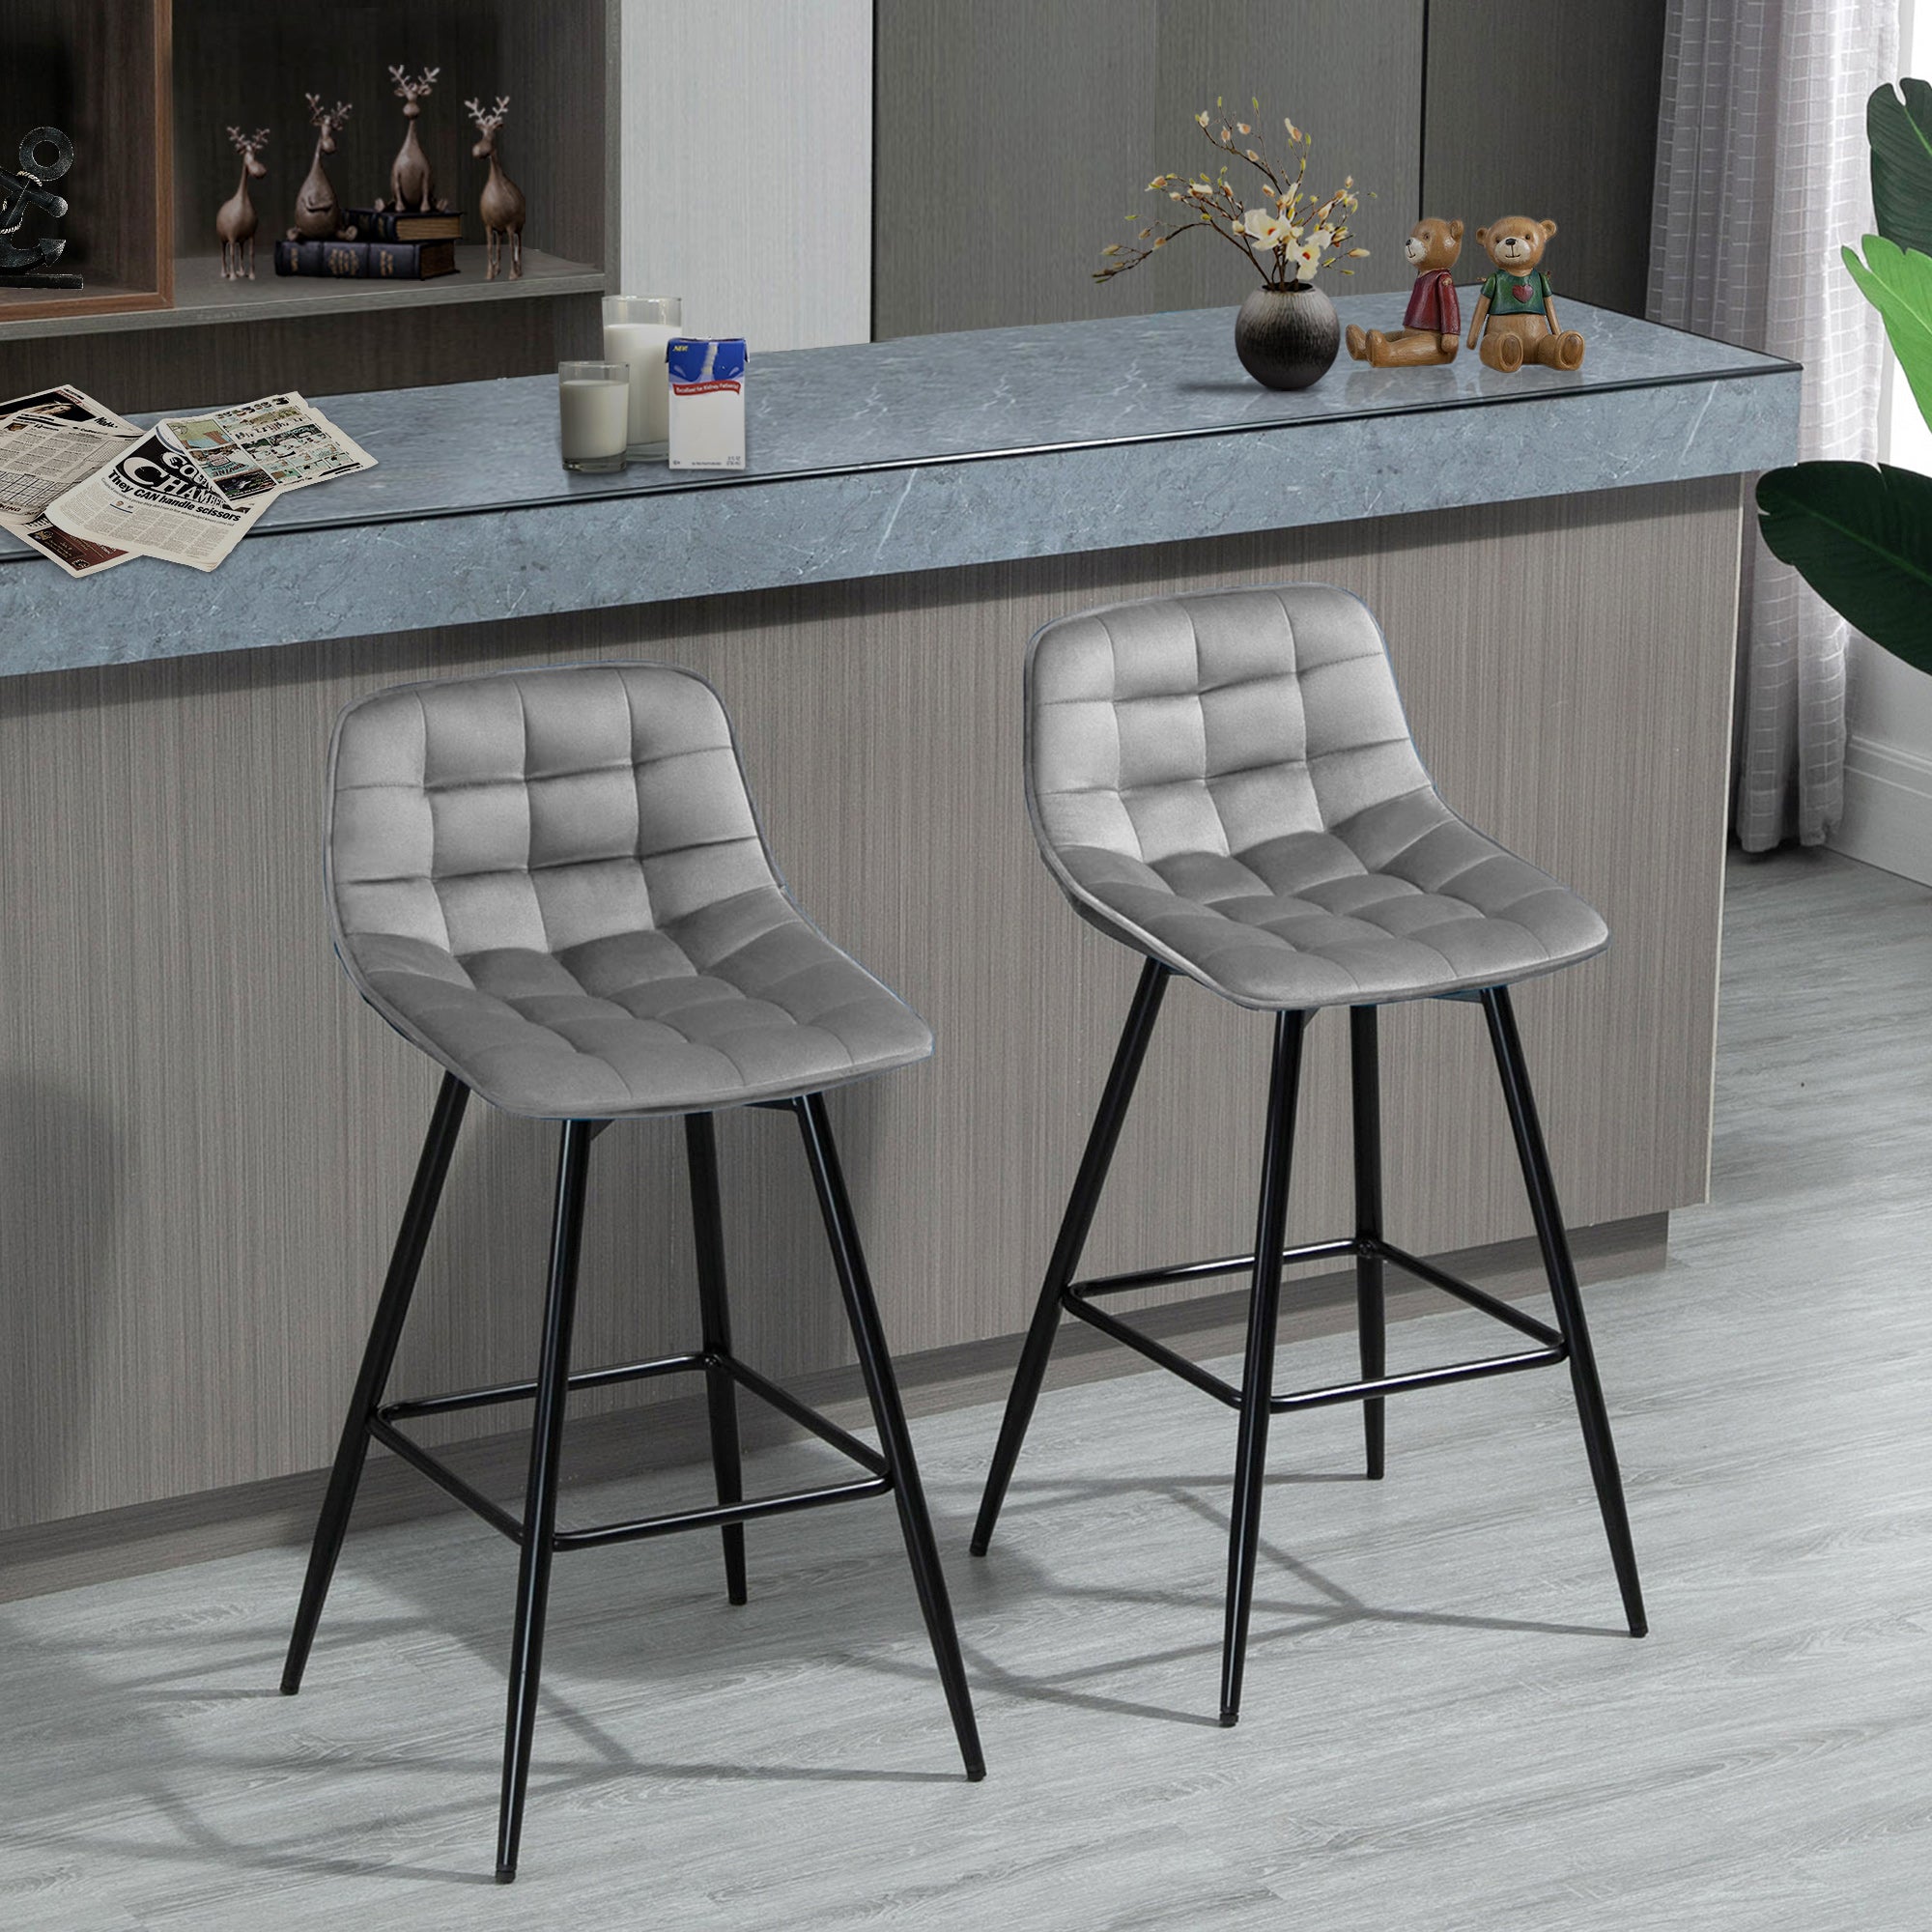 Set of 2 Bar stools With Backs Velvet-Touch Dining Chairs Kitchen Counter Chairs  Fabric Upholstered seat with Metal Legs, Backrest, Grey  AOSOM   